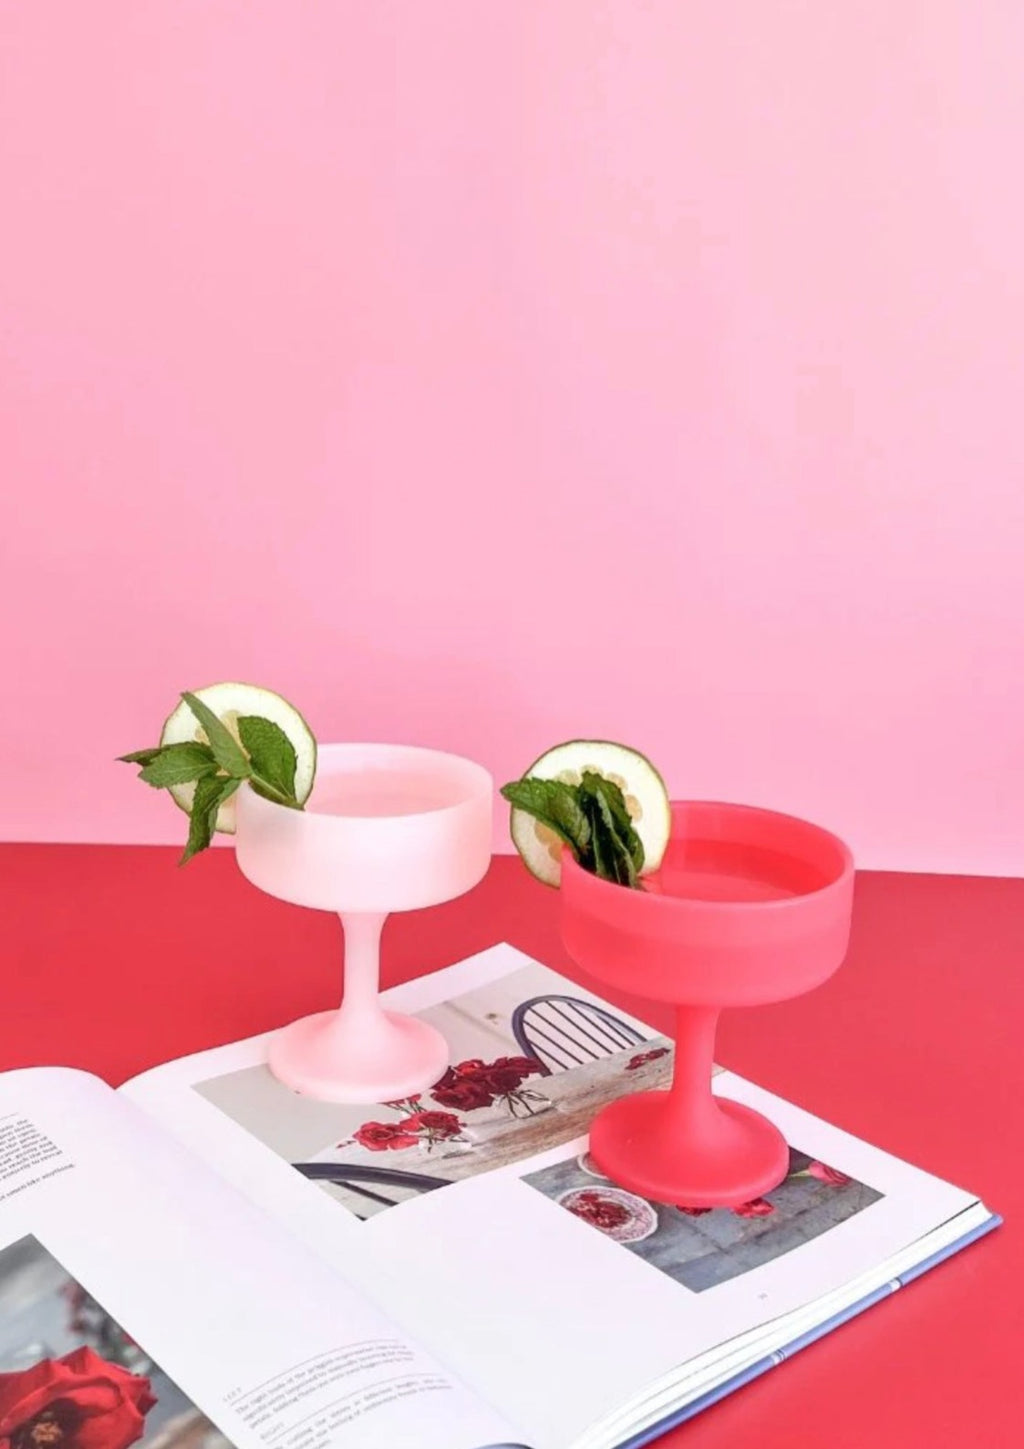 Cherry + Blush | Mecc | Silicone Unbreakable Cocktail Glasses, by Porter Green mecc | modern + ethical + cocktail + coupe  Discover the famous mecc unbreakable cocktail glasses by Porter Green, the world leaders in silicone drinkware. Made from FDA approved food grade silicone, lightweight, portable, and commercial dishwasher safe, mecc are the perfect coupe cocktail glass for indoor/outdoor events and entertaining. 